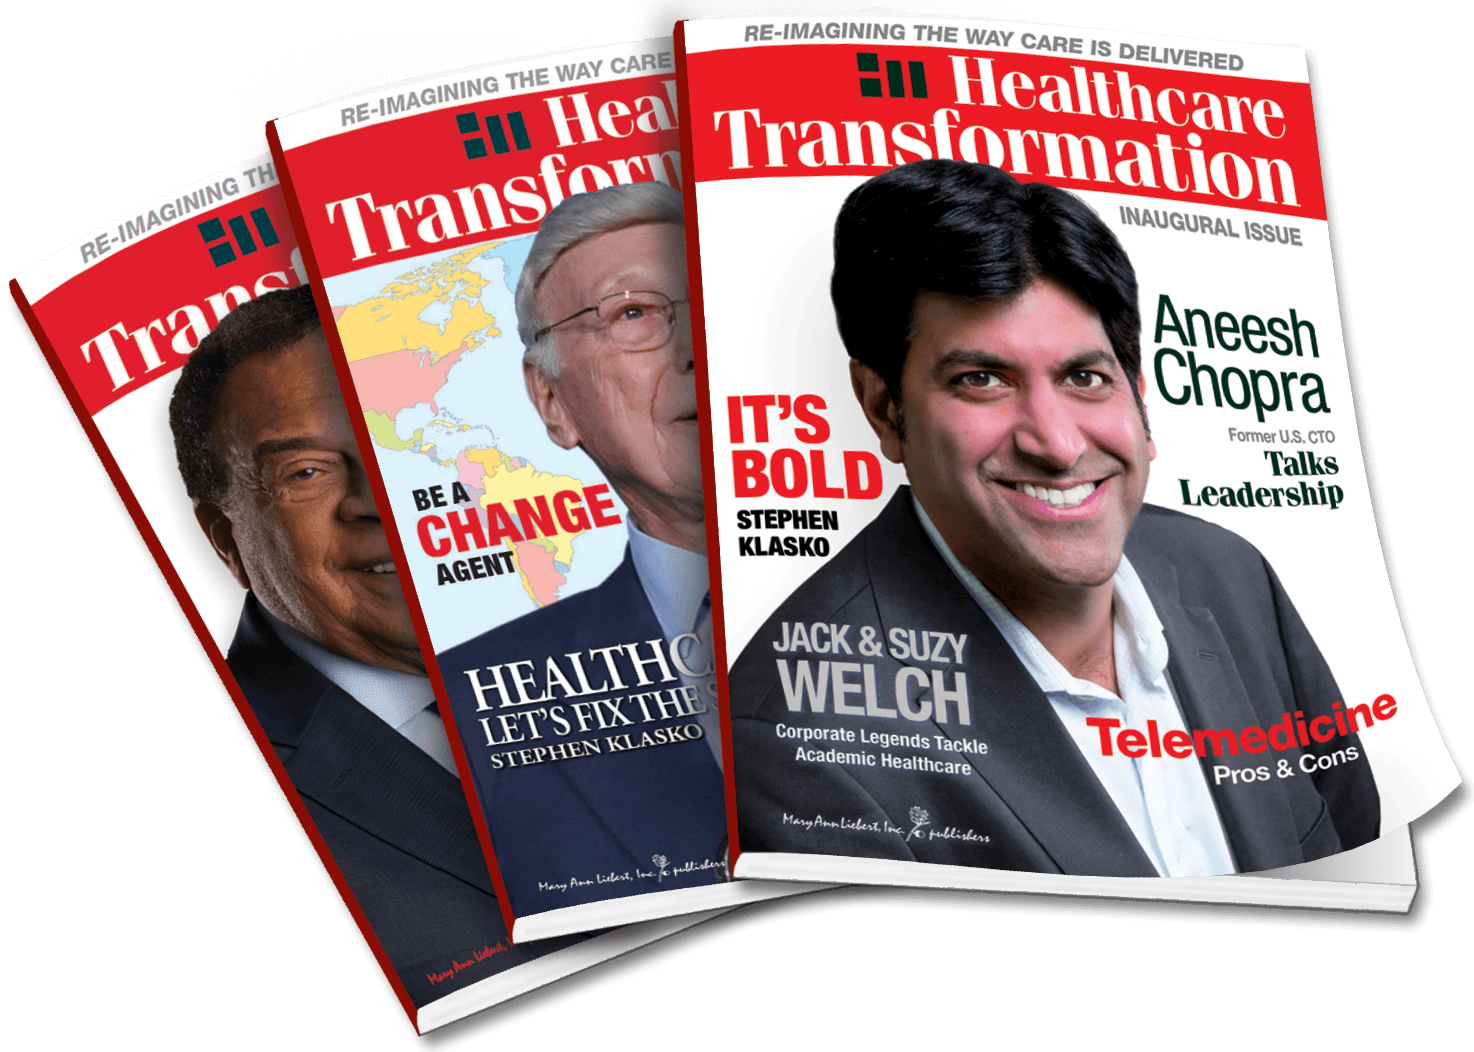 Healthcare Transformation journal covers